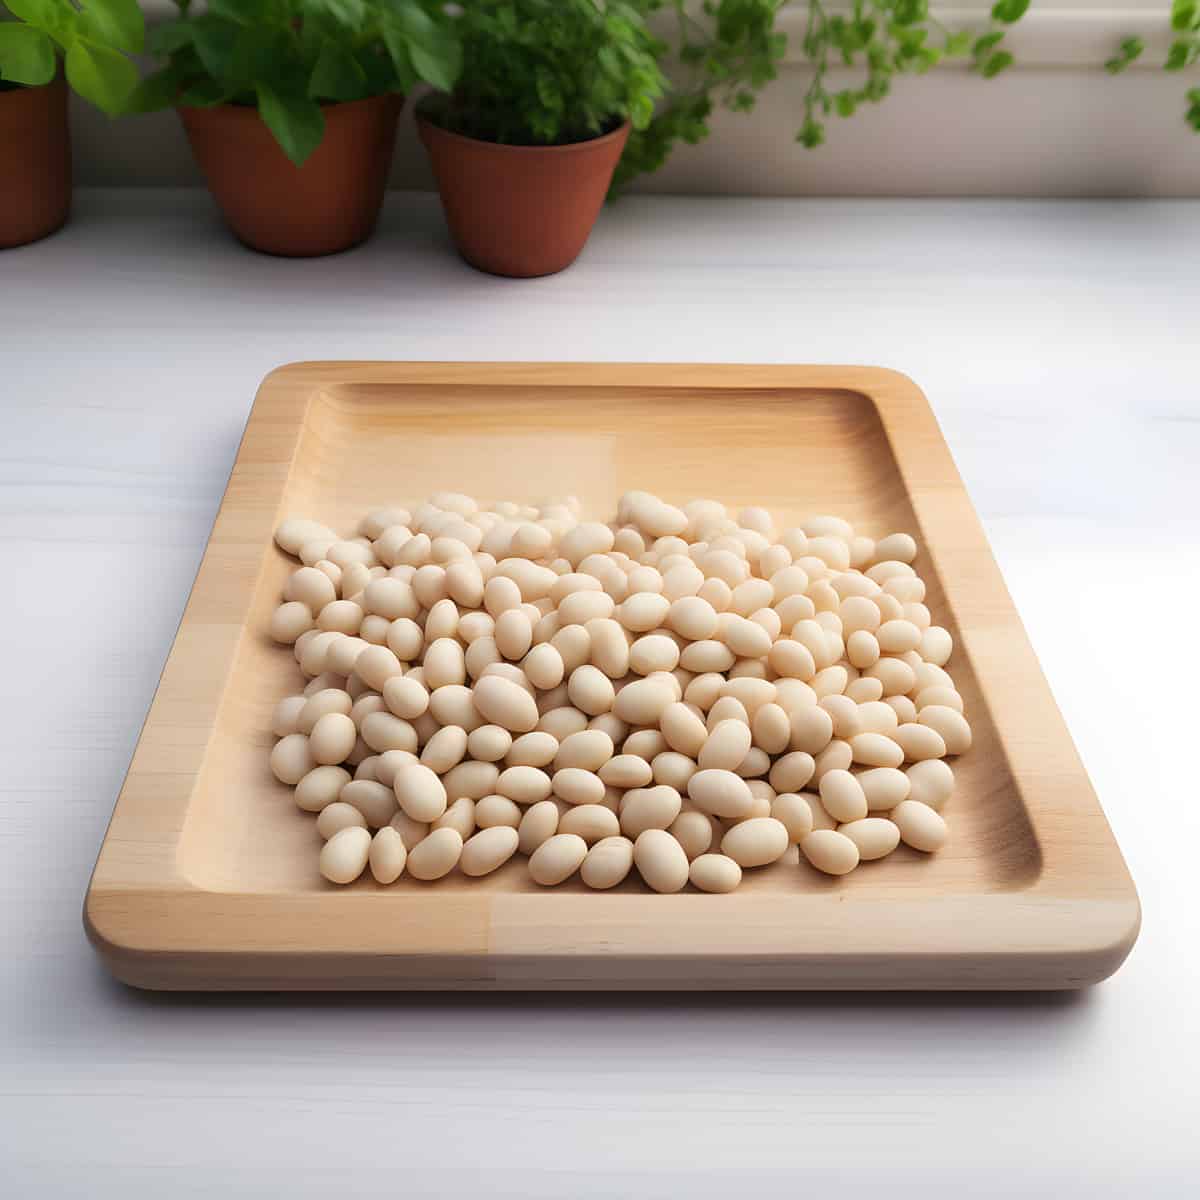 Haricot Beans on a kitchen counter